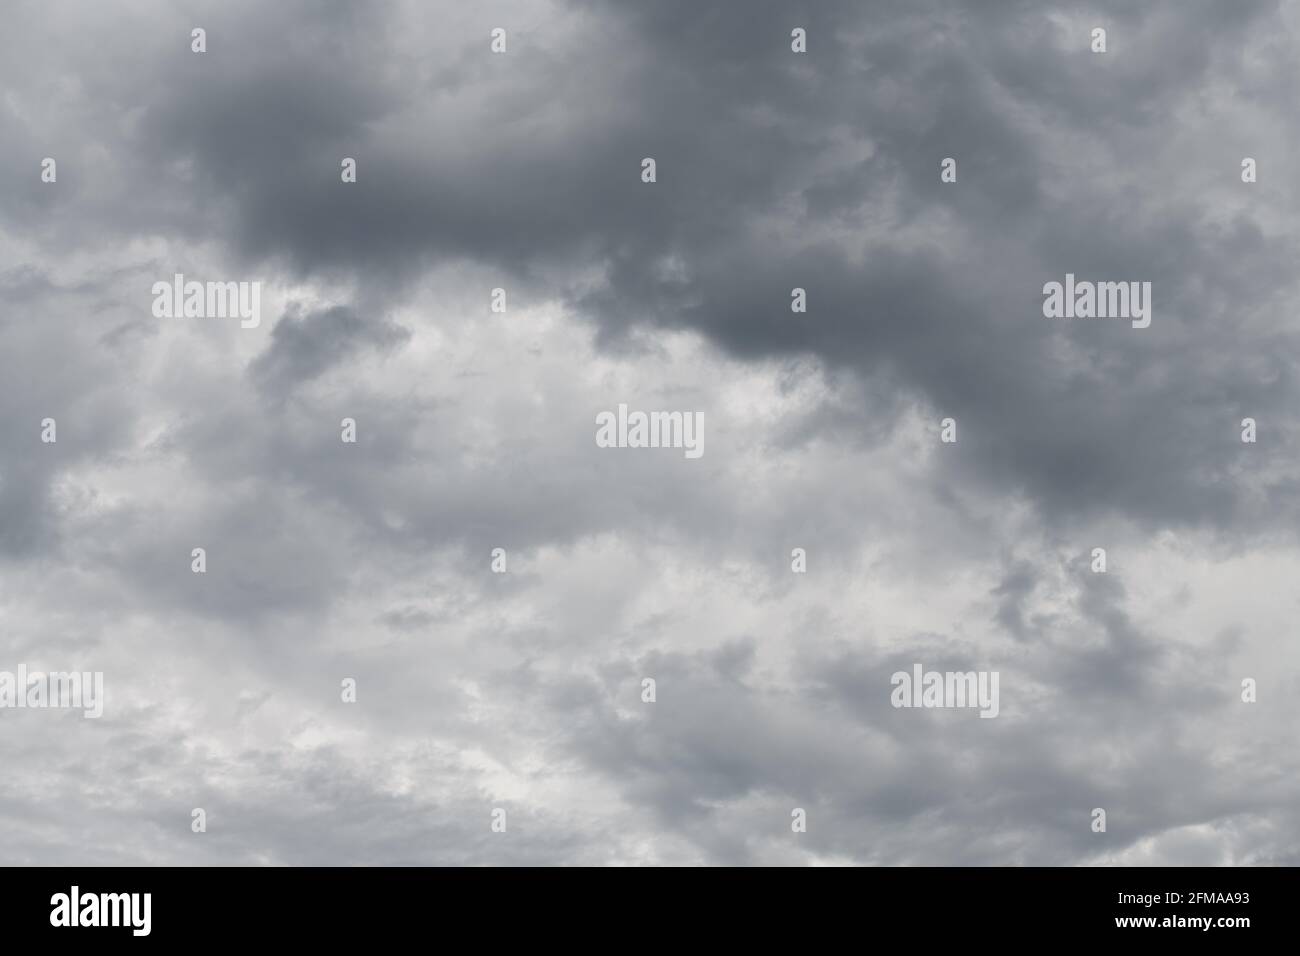 A sweeping pattern of clouds evolving as an intricate background pattern Stock Photo